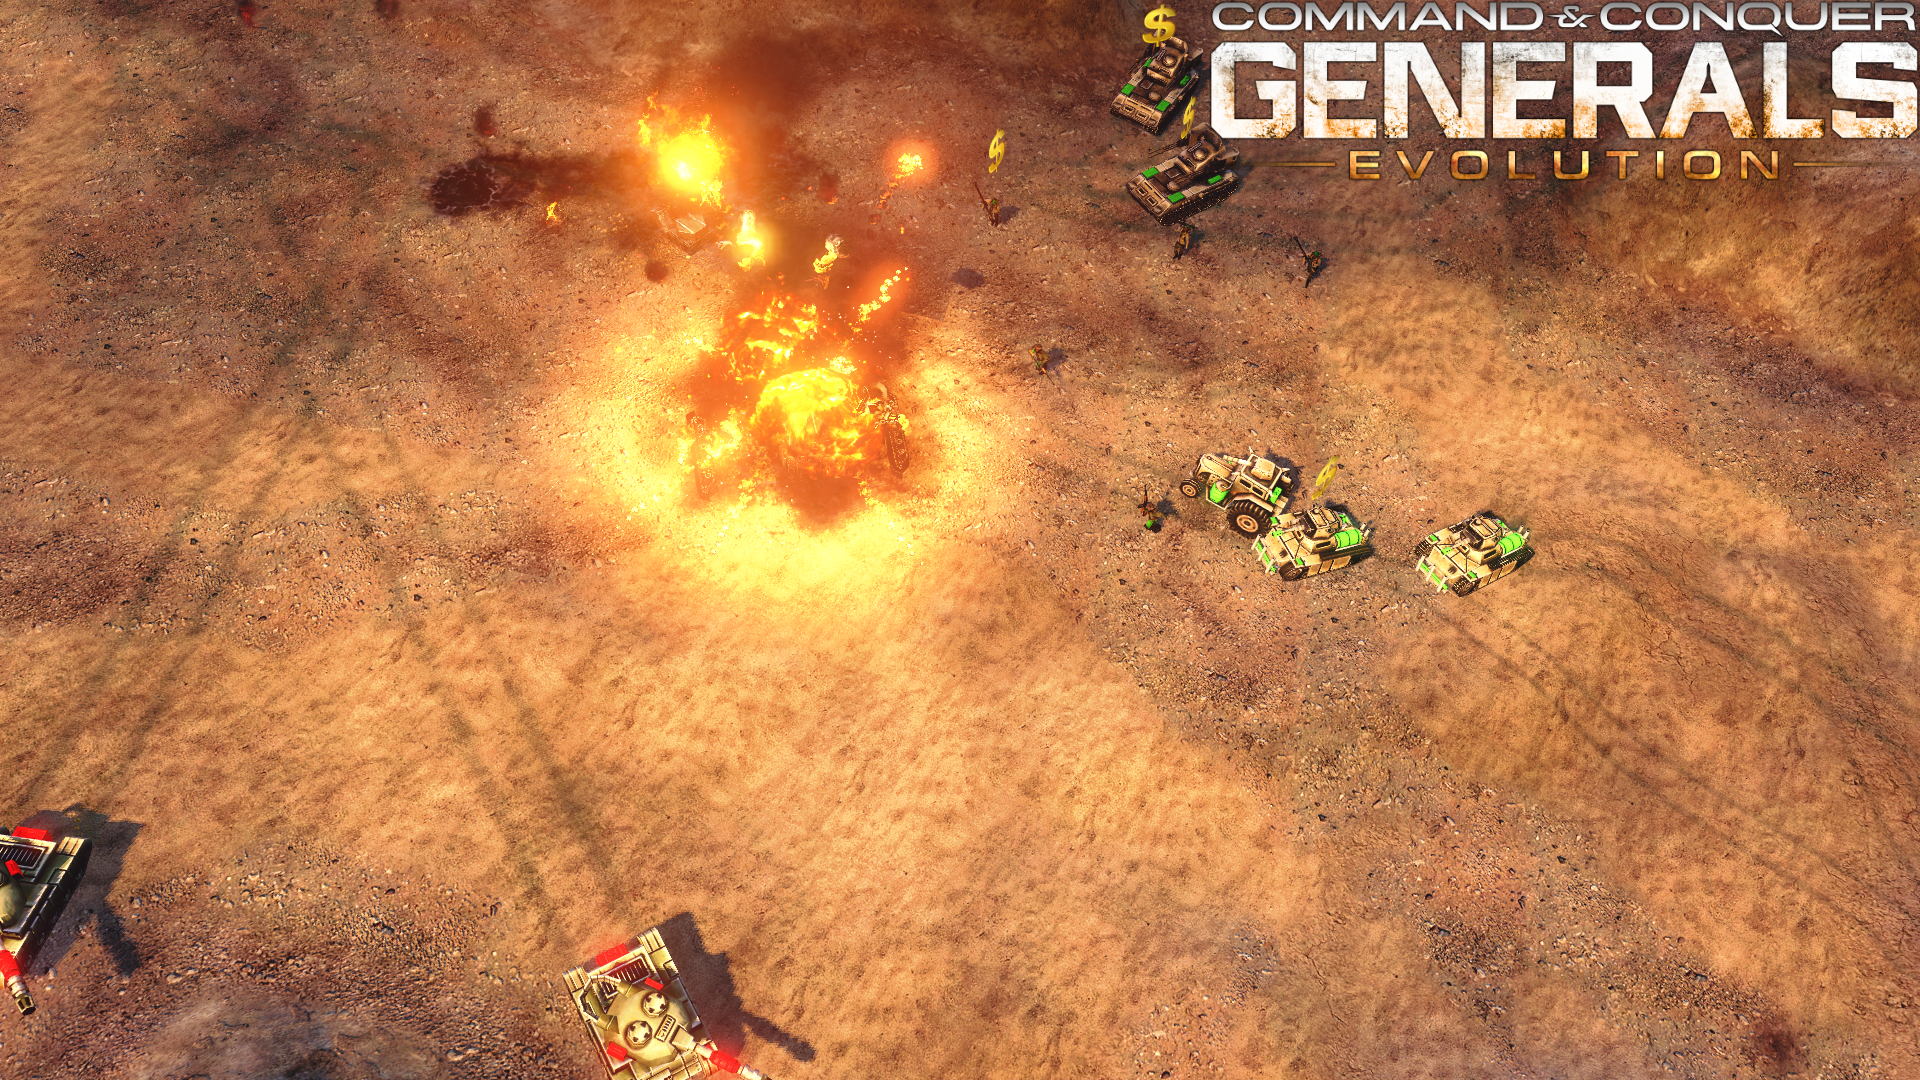 command and conquer generals evolution 2021 free download